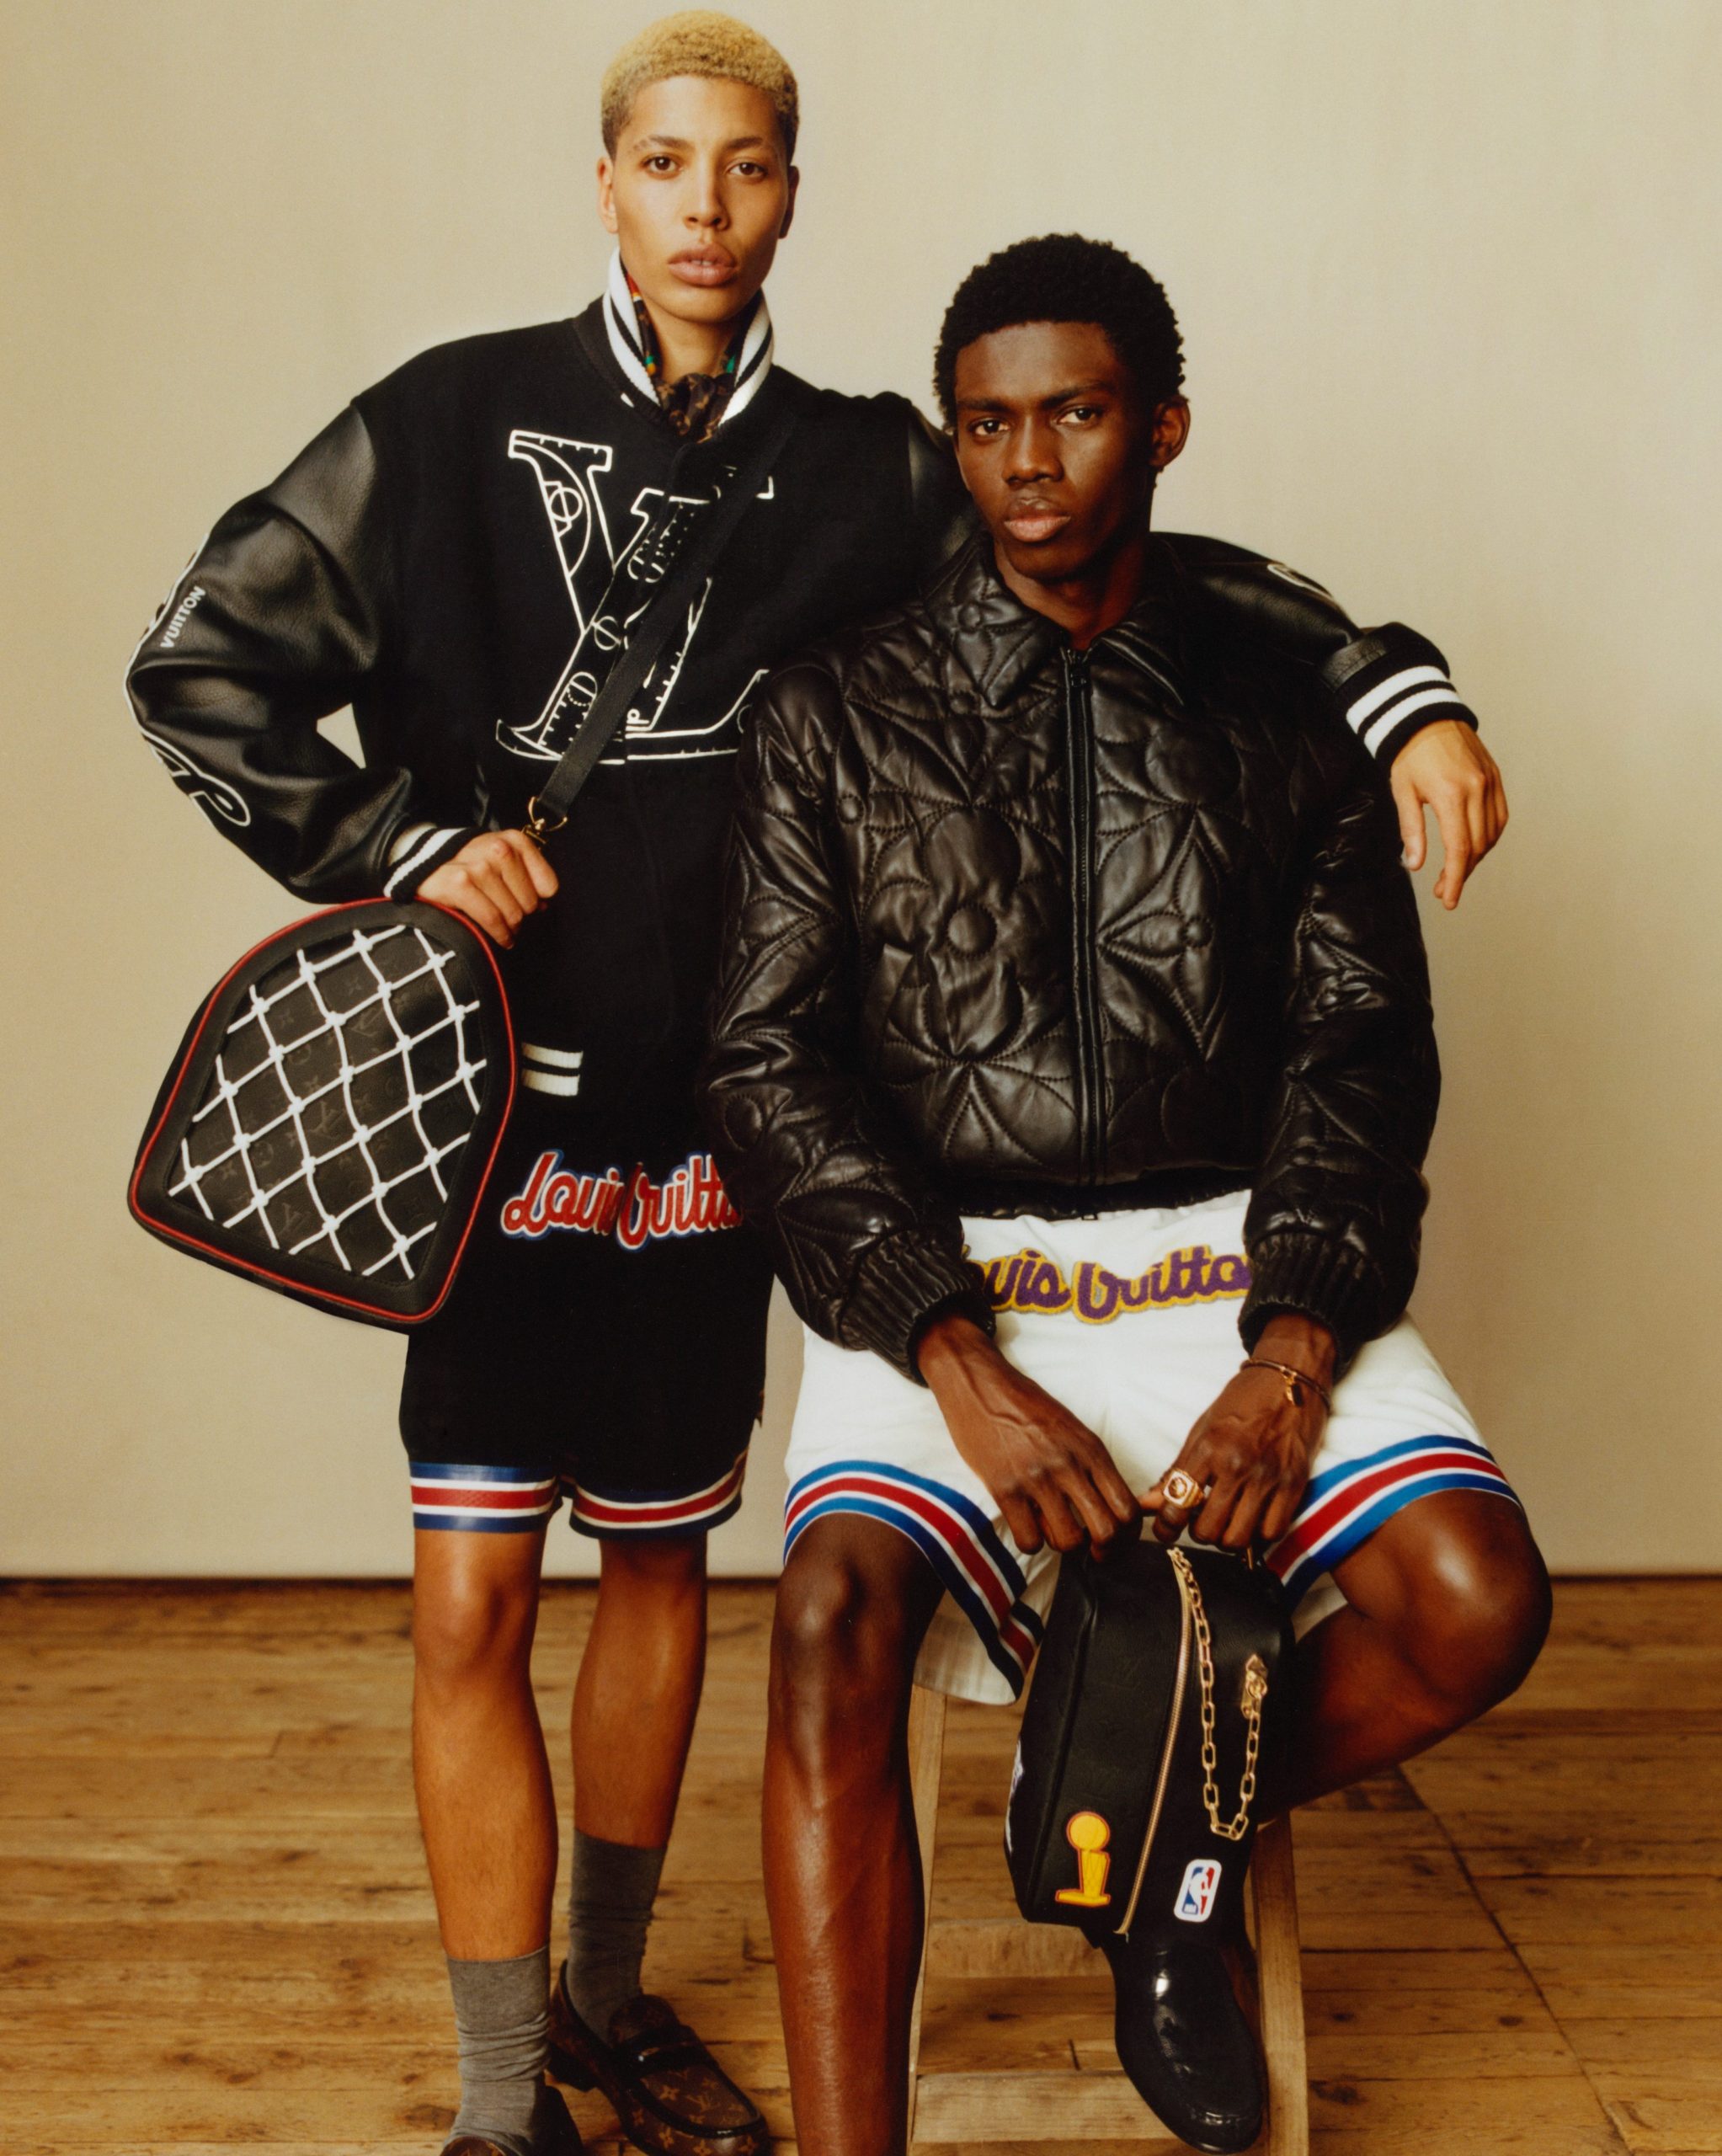 New Louis Vuitton x NBA collection offers a look into a basketball 